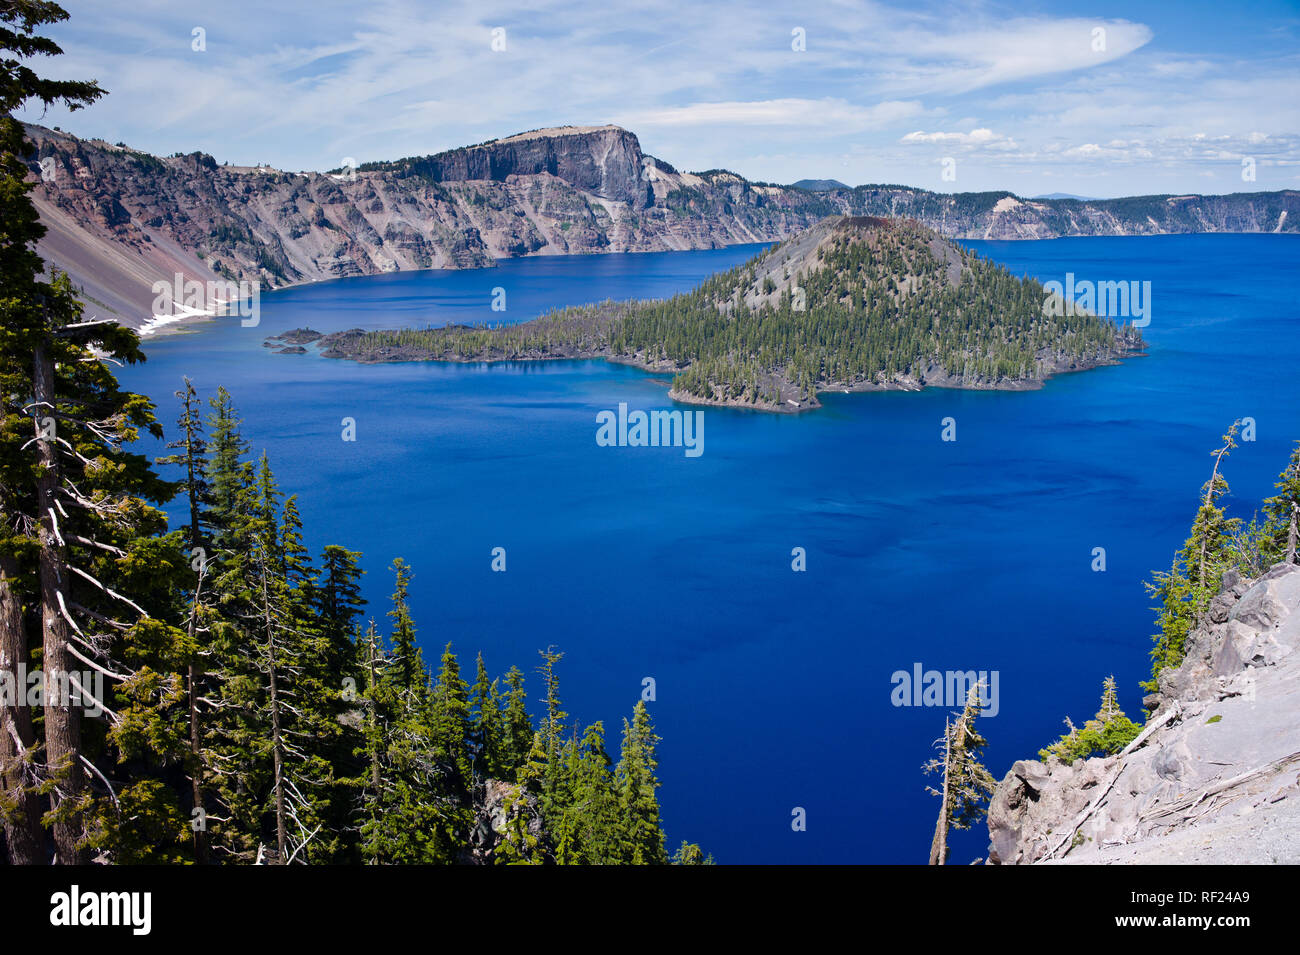 Crater Lake in Oregon is the deepest lake in the US, and because ...